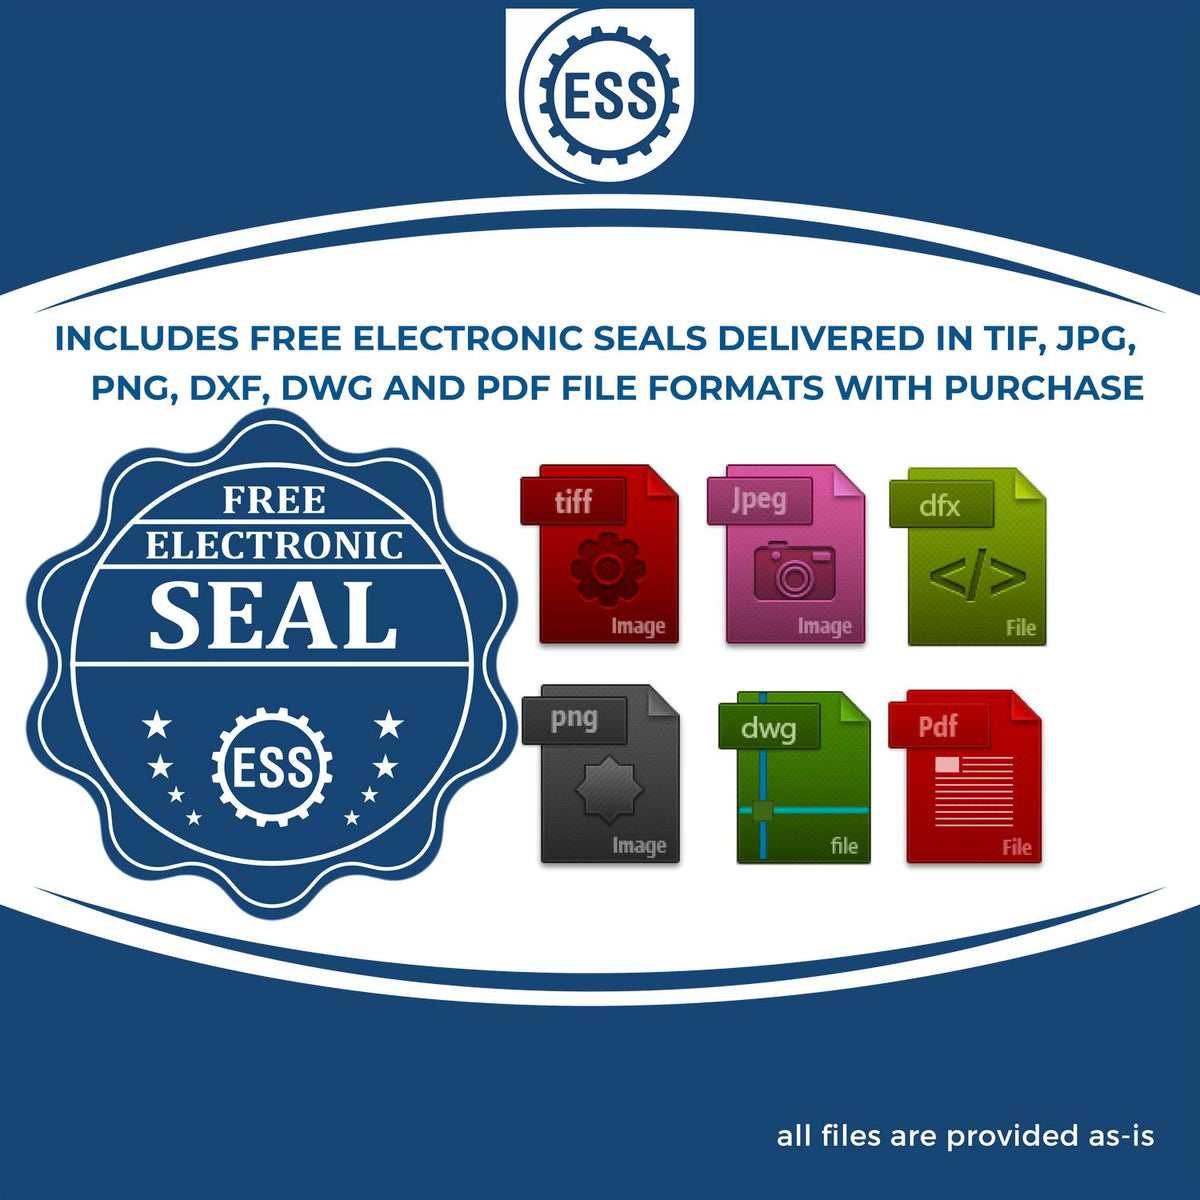 An infographic for the free electronic seal for the Long Reach North Carolina Geology Seal illustrating the different file type icons such as DXF, DWG, TIF, JPG and PNG.